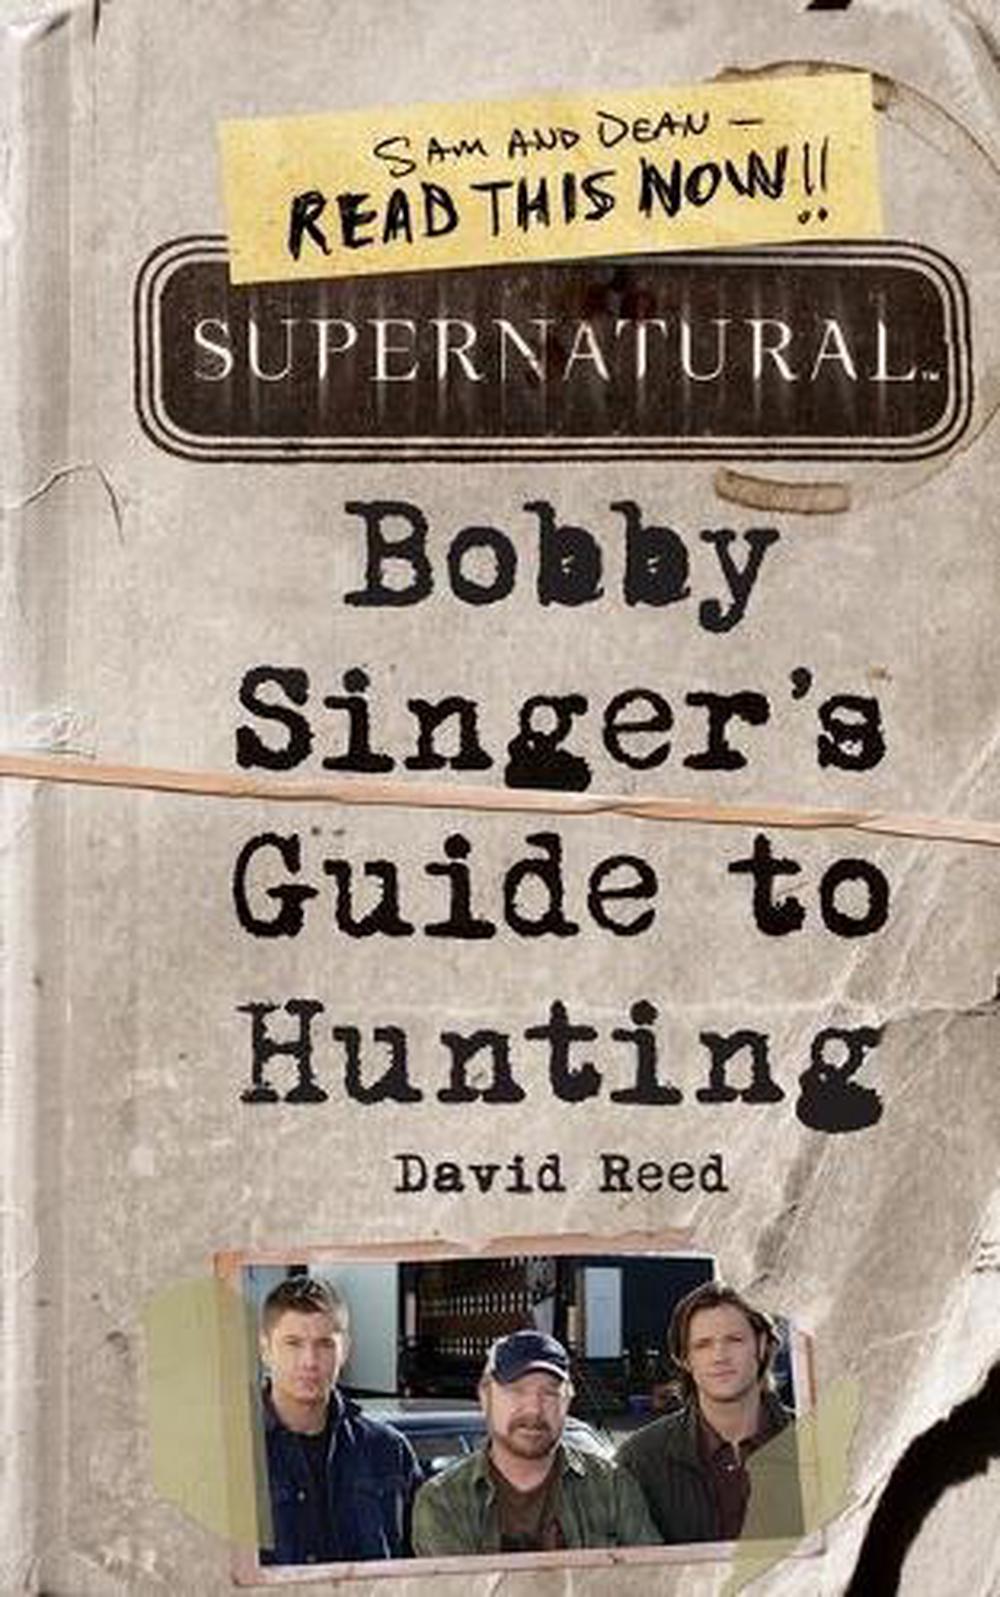 Supernatural Bobby Singer's Guide to Hunting by David Reed, Paperback